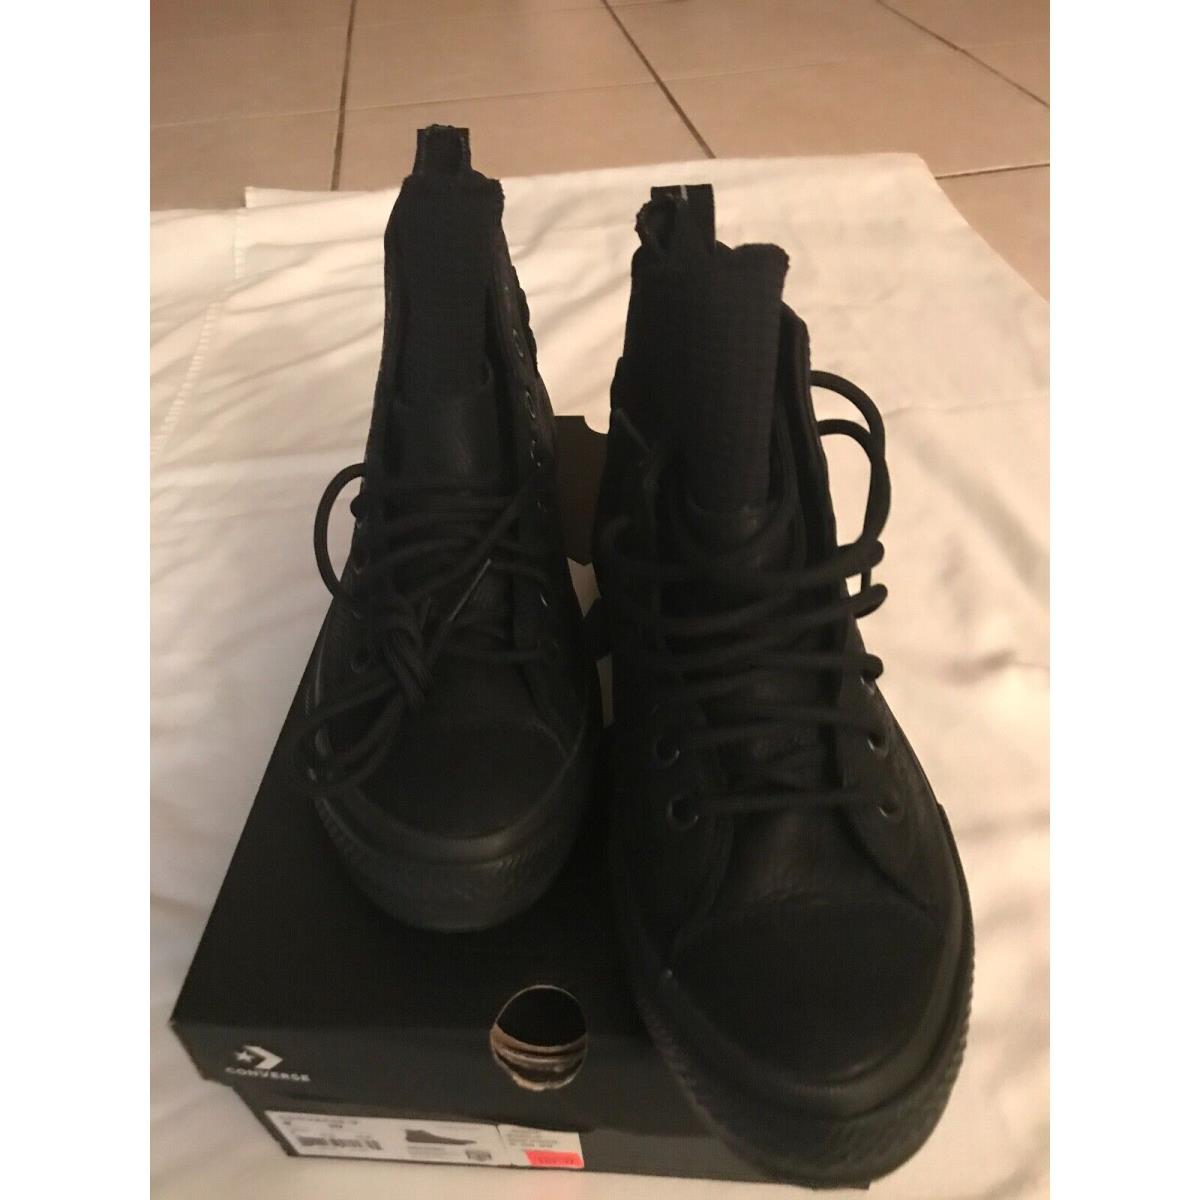 linkage accumulate ballet Converse Chuck Taylor All Star Waterproof Triple Black Boot Shoes 162409C |  084783007371 - Converse shoes - Black | SporTipTop